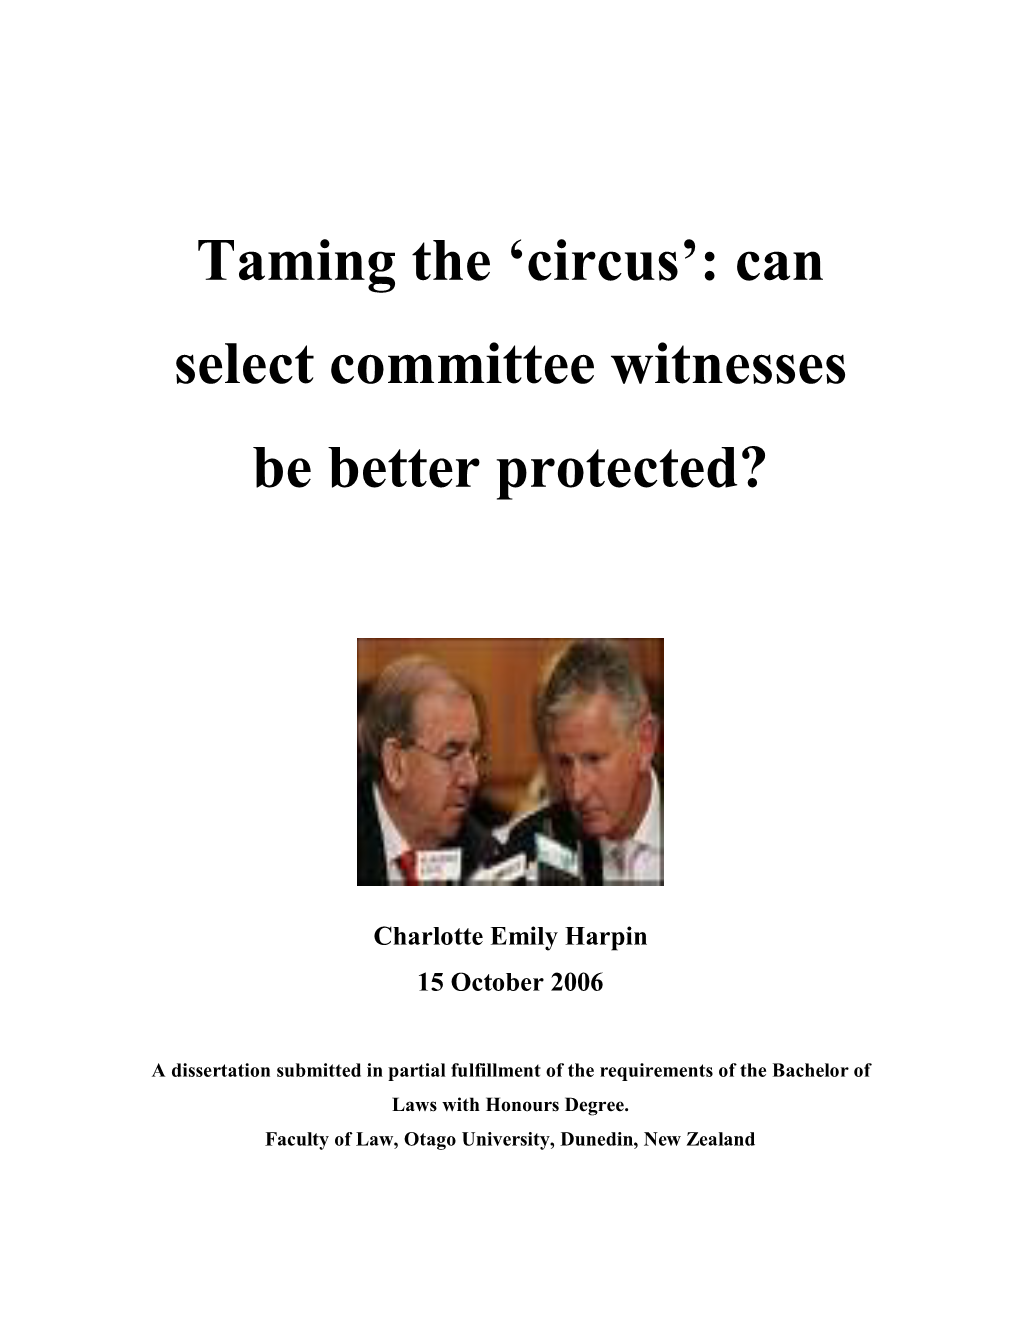 Taming the ”Circus': Can Select Committee Witnesses Be Better Protected?